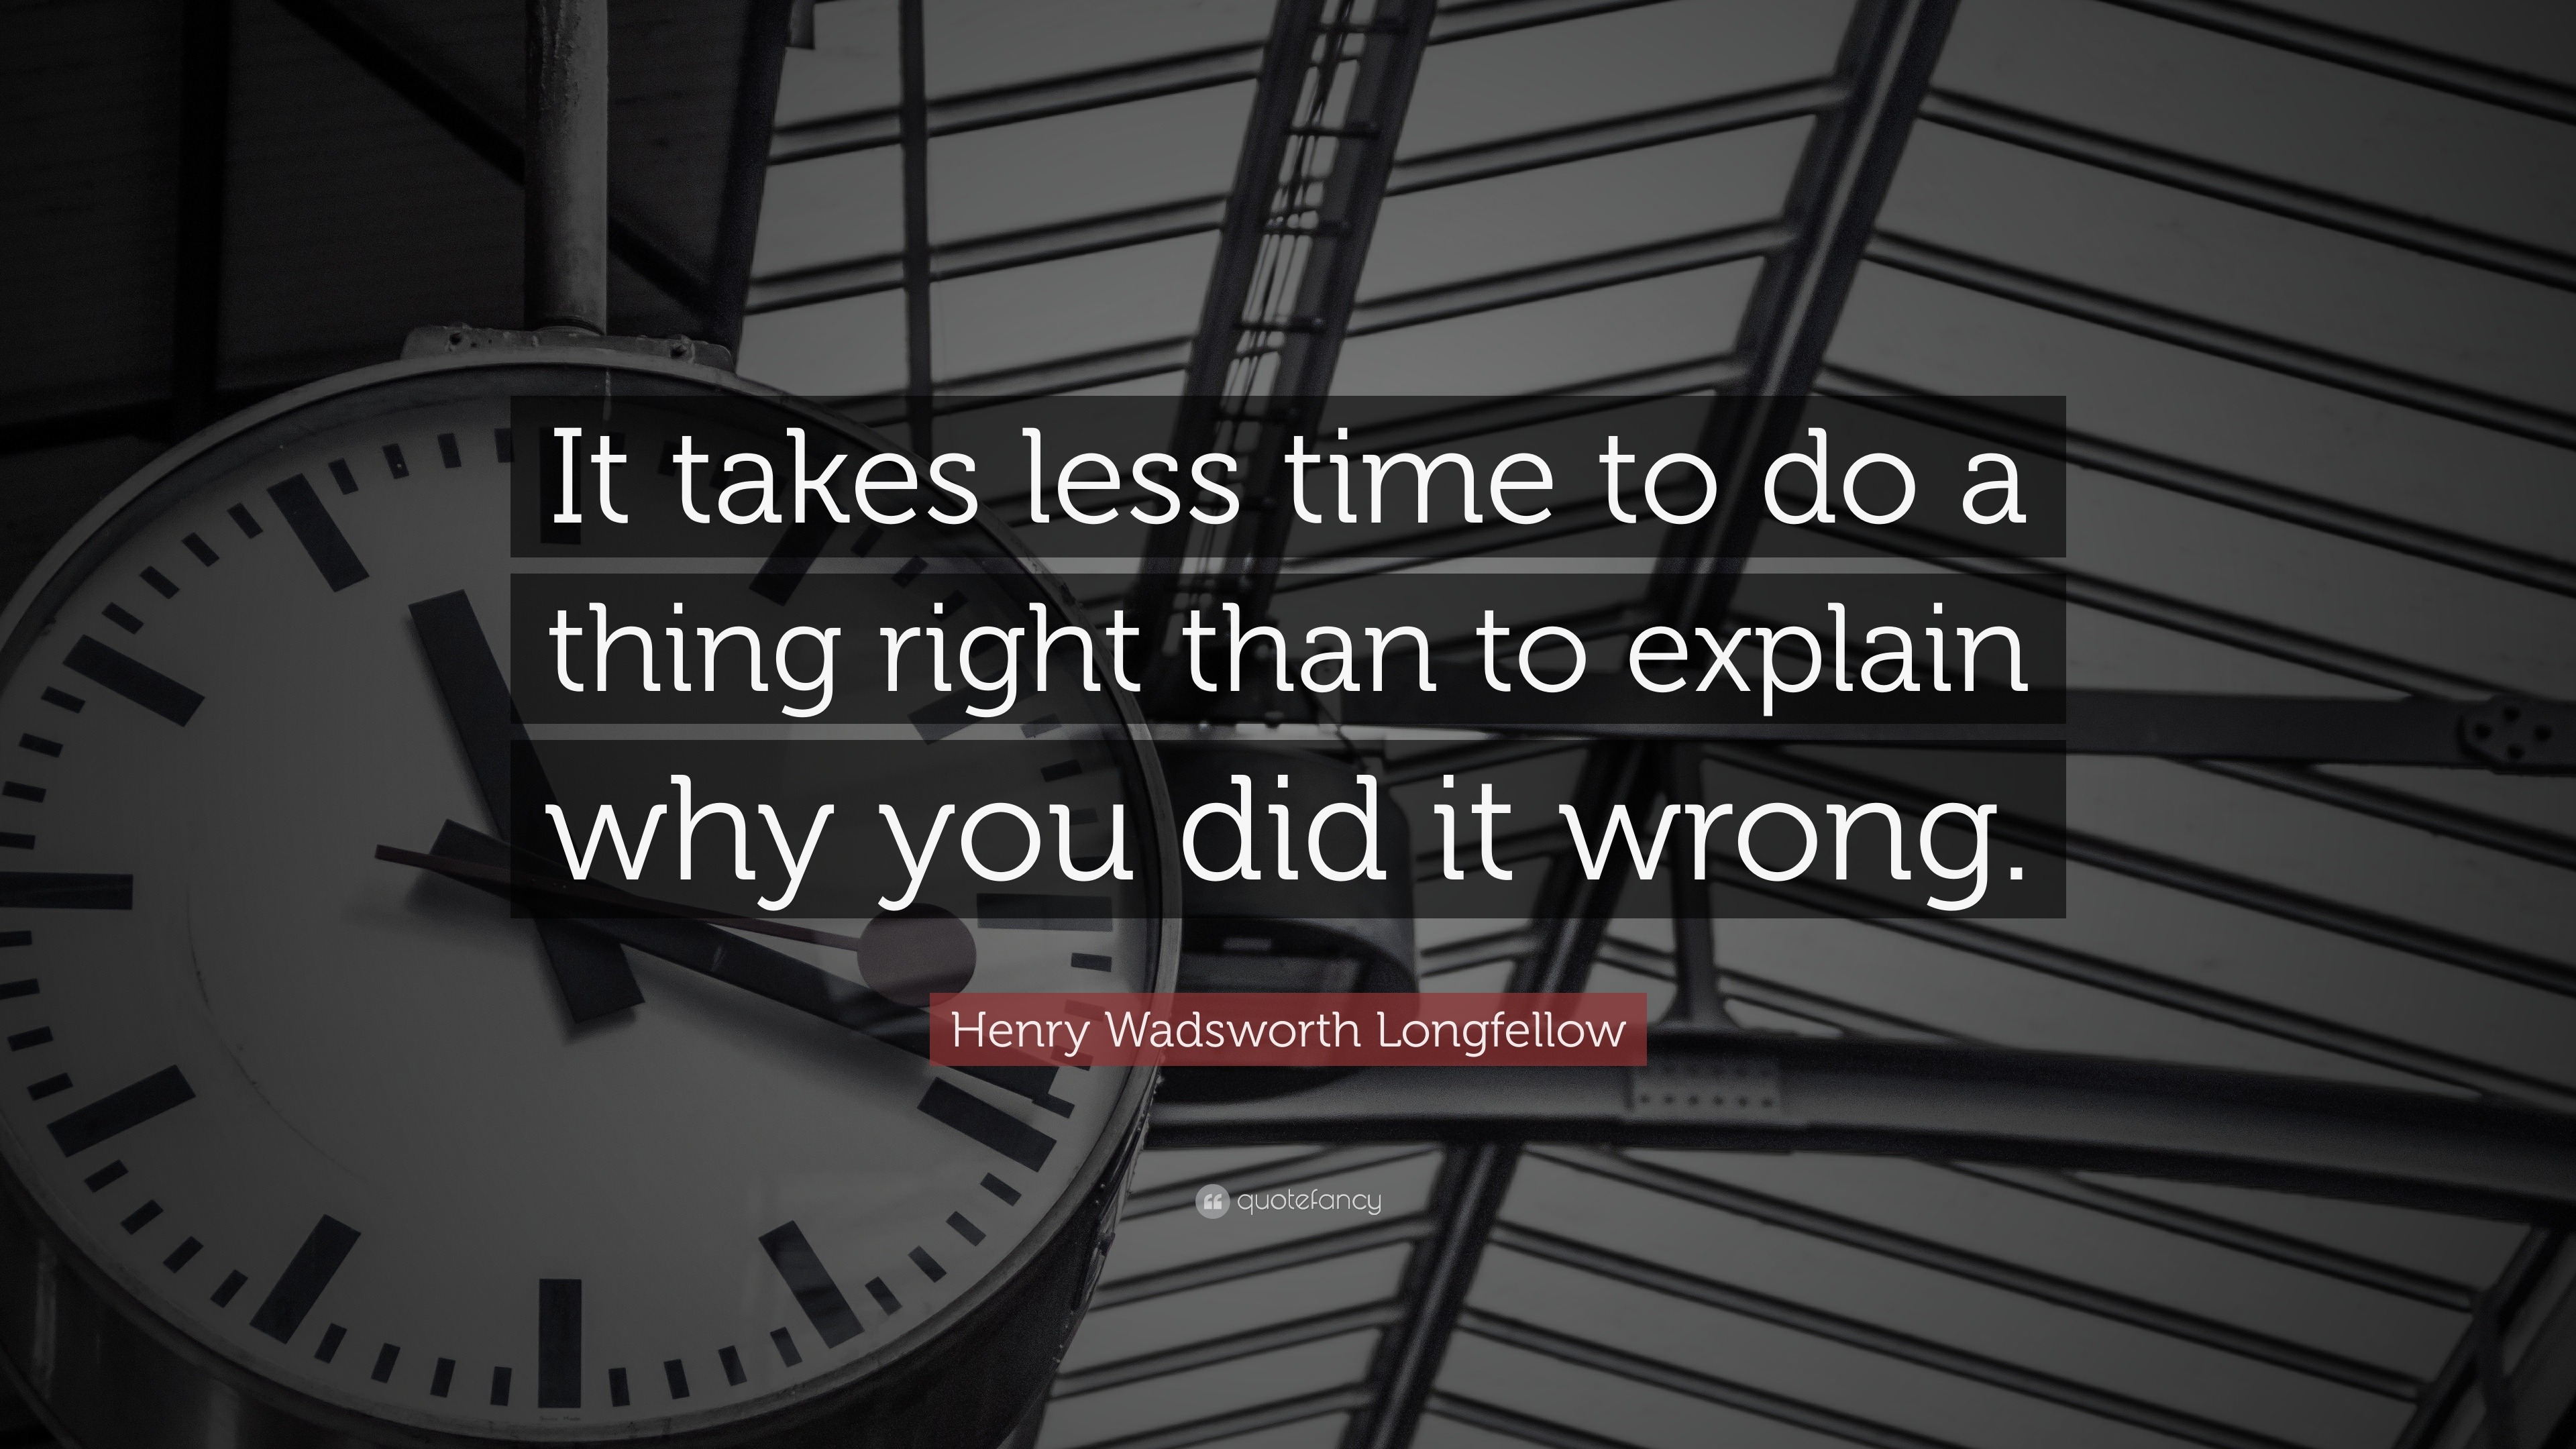 Integrity Quotes “It takes less time to do a thing right than to explain